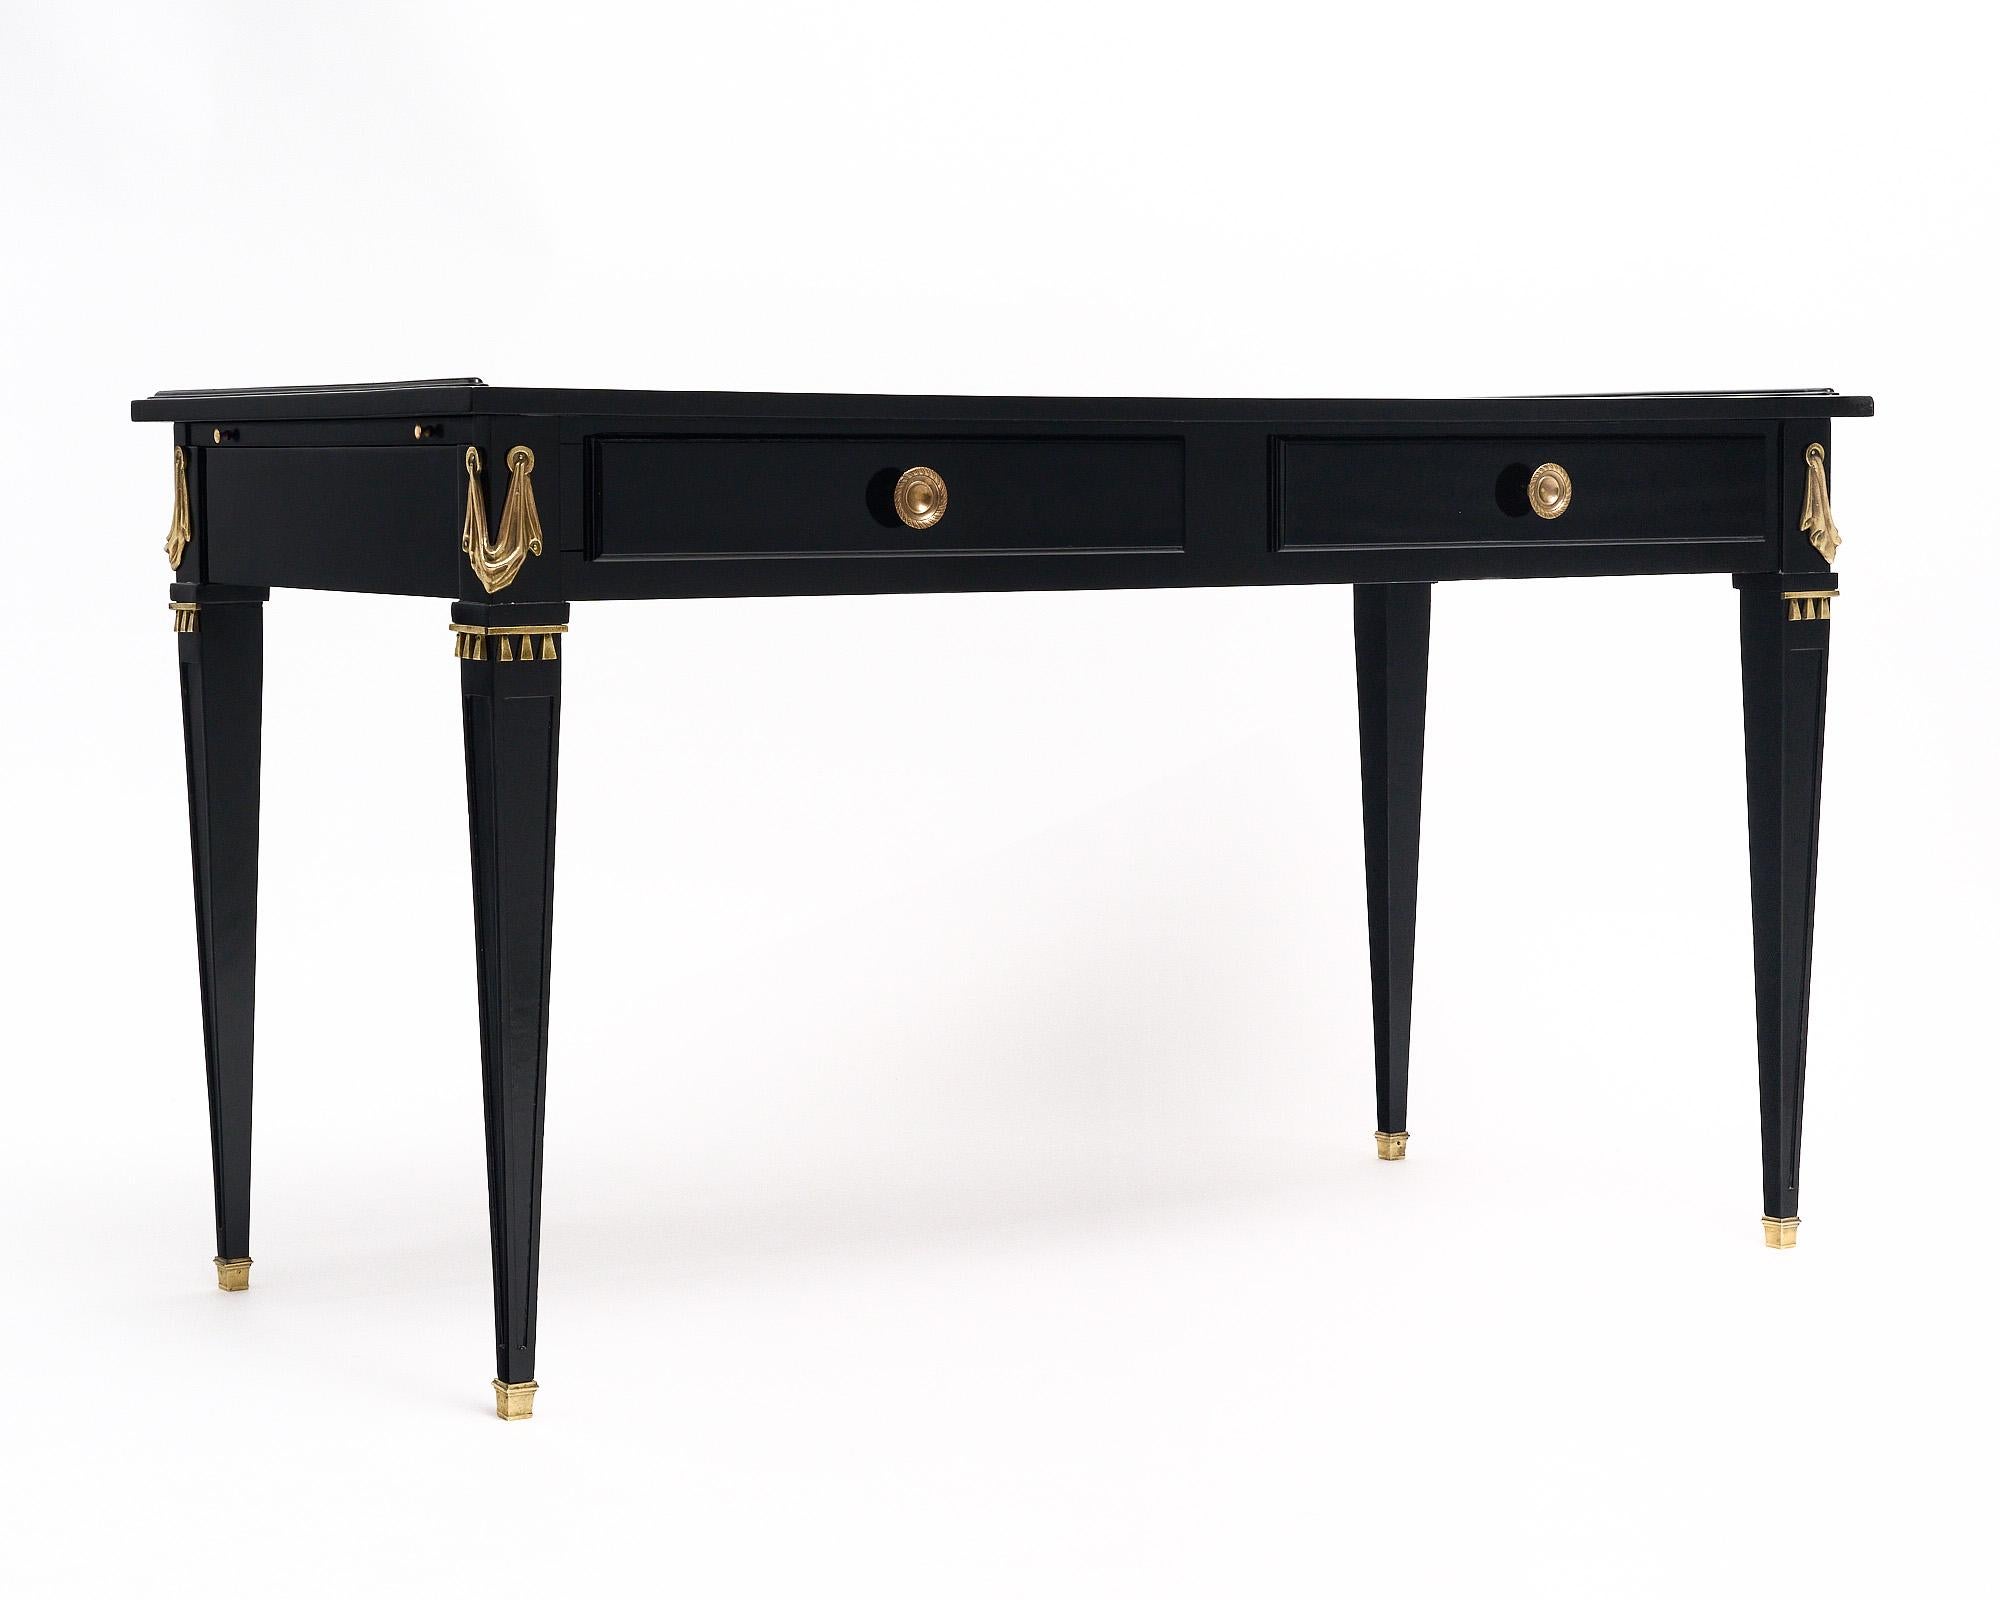 Writing desk from the Art Deco period in France and in the Empire style. This piece is finished with an ebonized museum-quality French polish. The top is covered in an original tan leather writing surface with a gold-leafed embossed trim. The desk